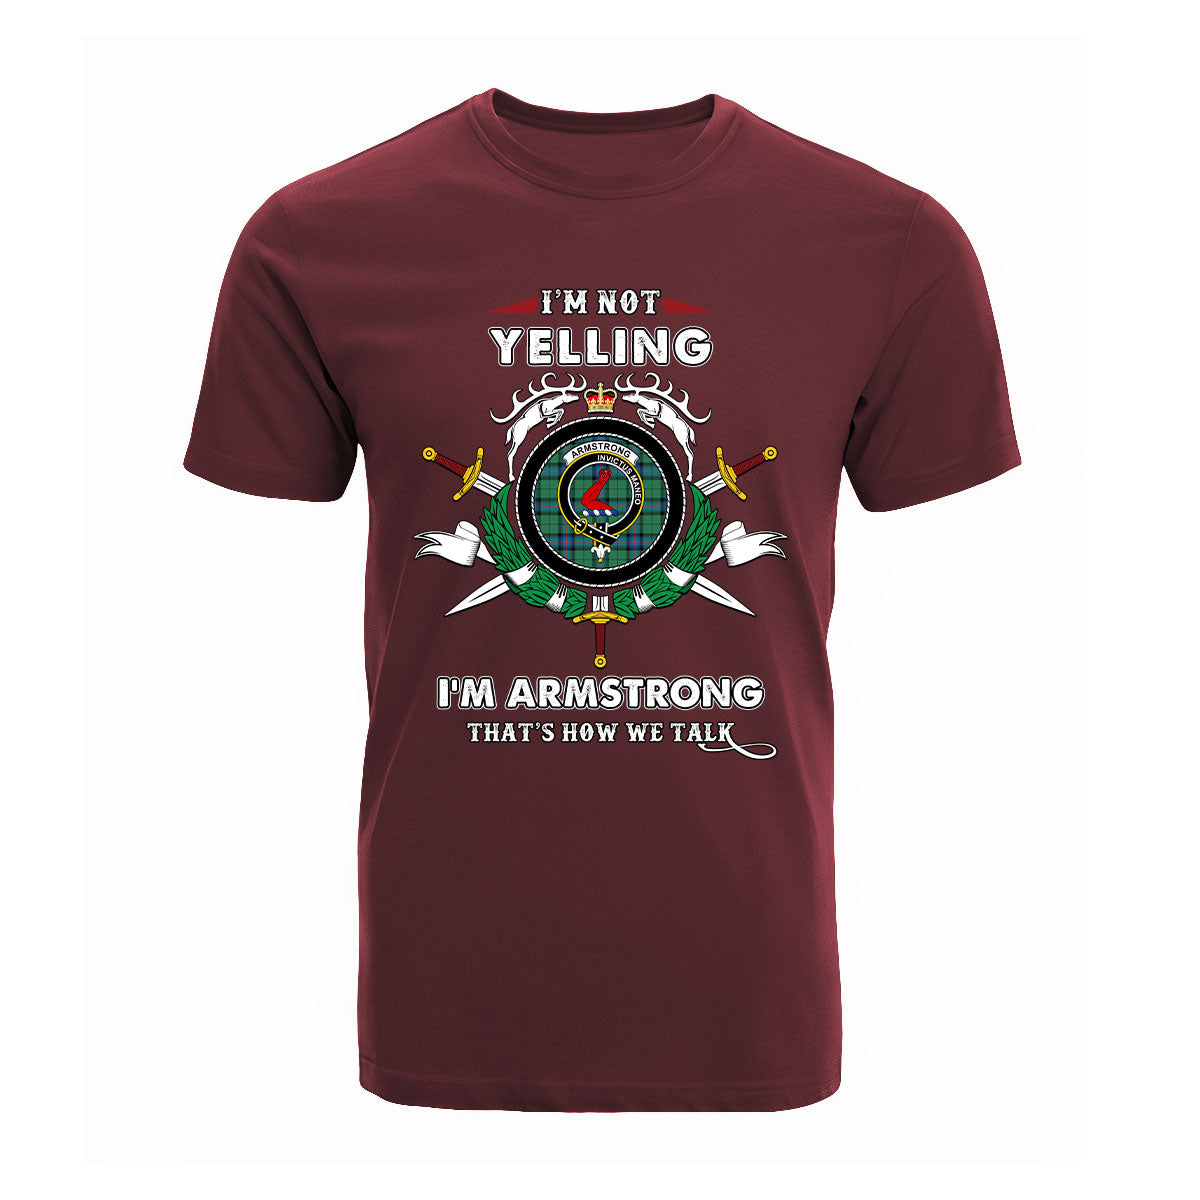 Armstrong Tartan Crest T-shirt - I'm not yelling style